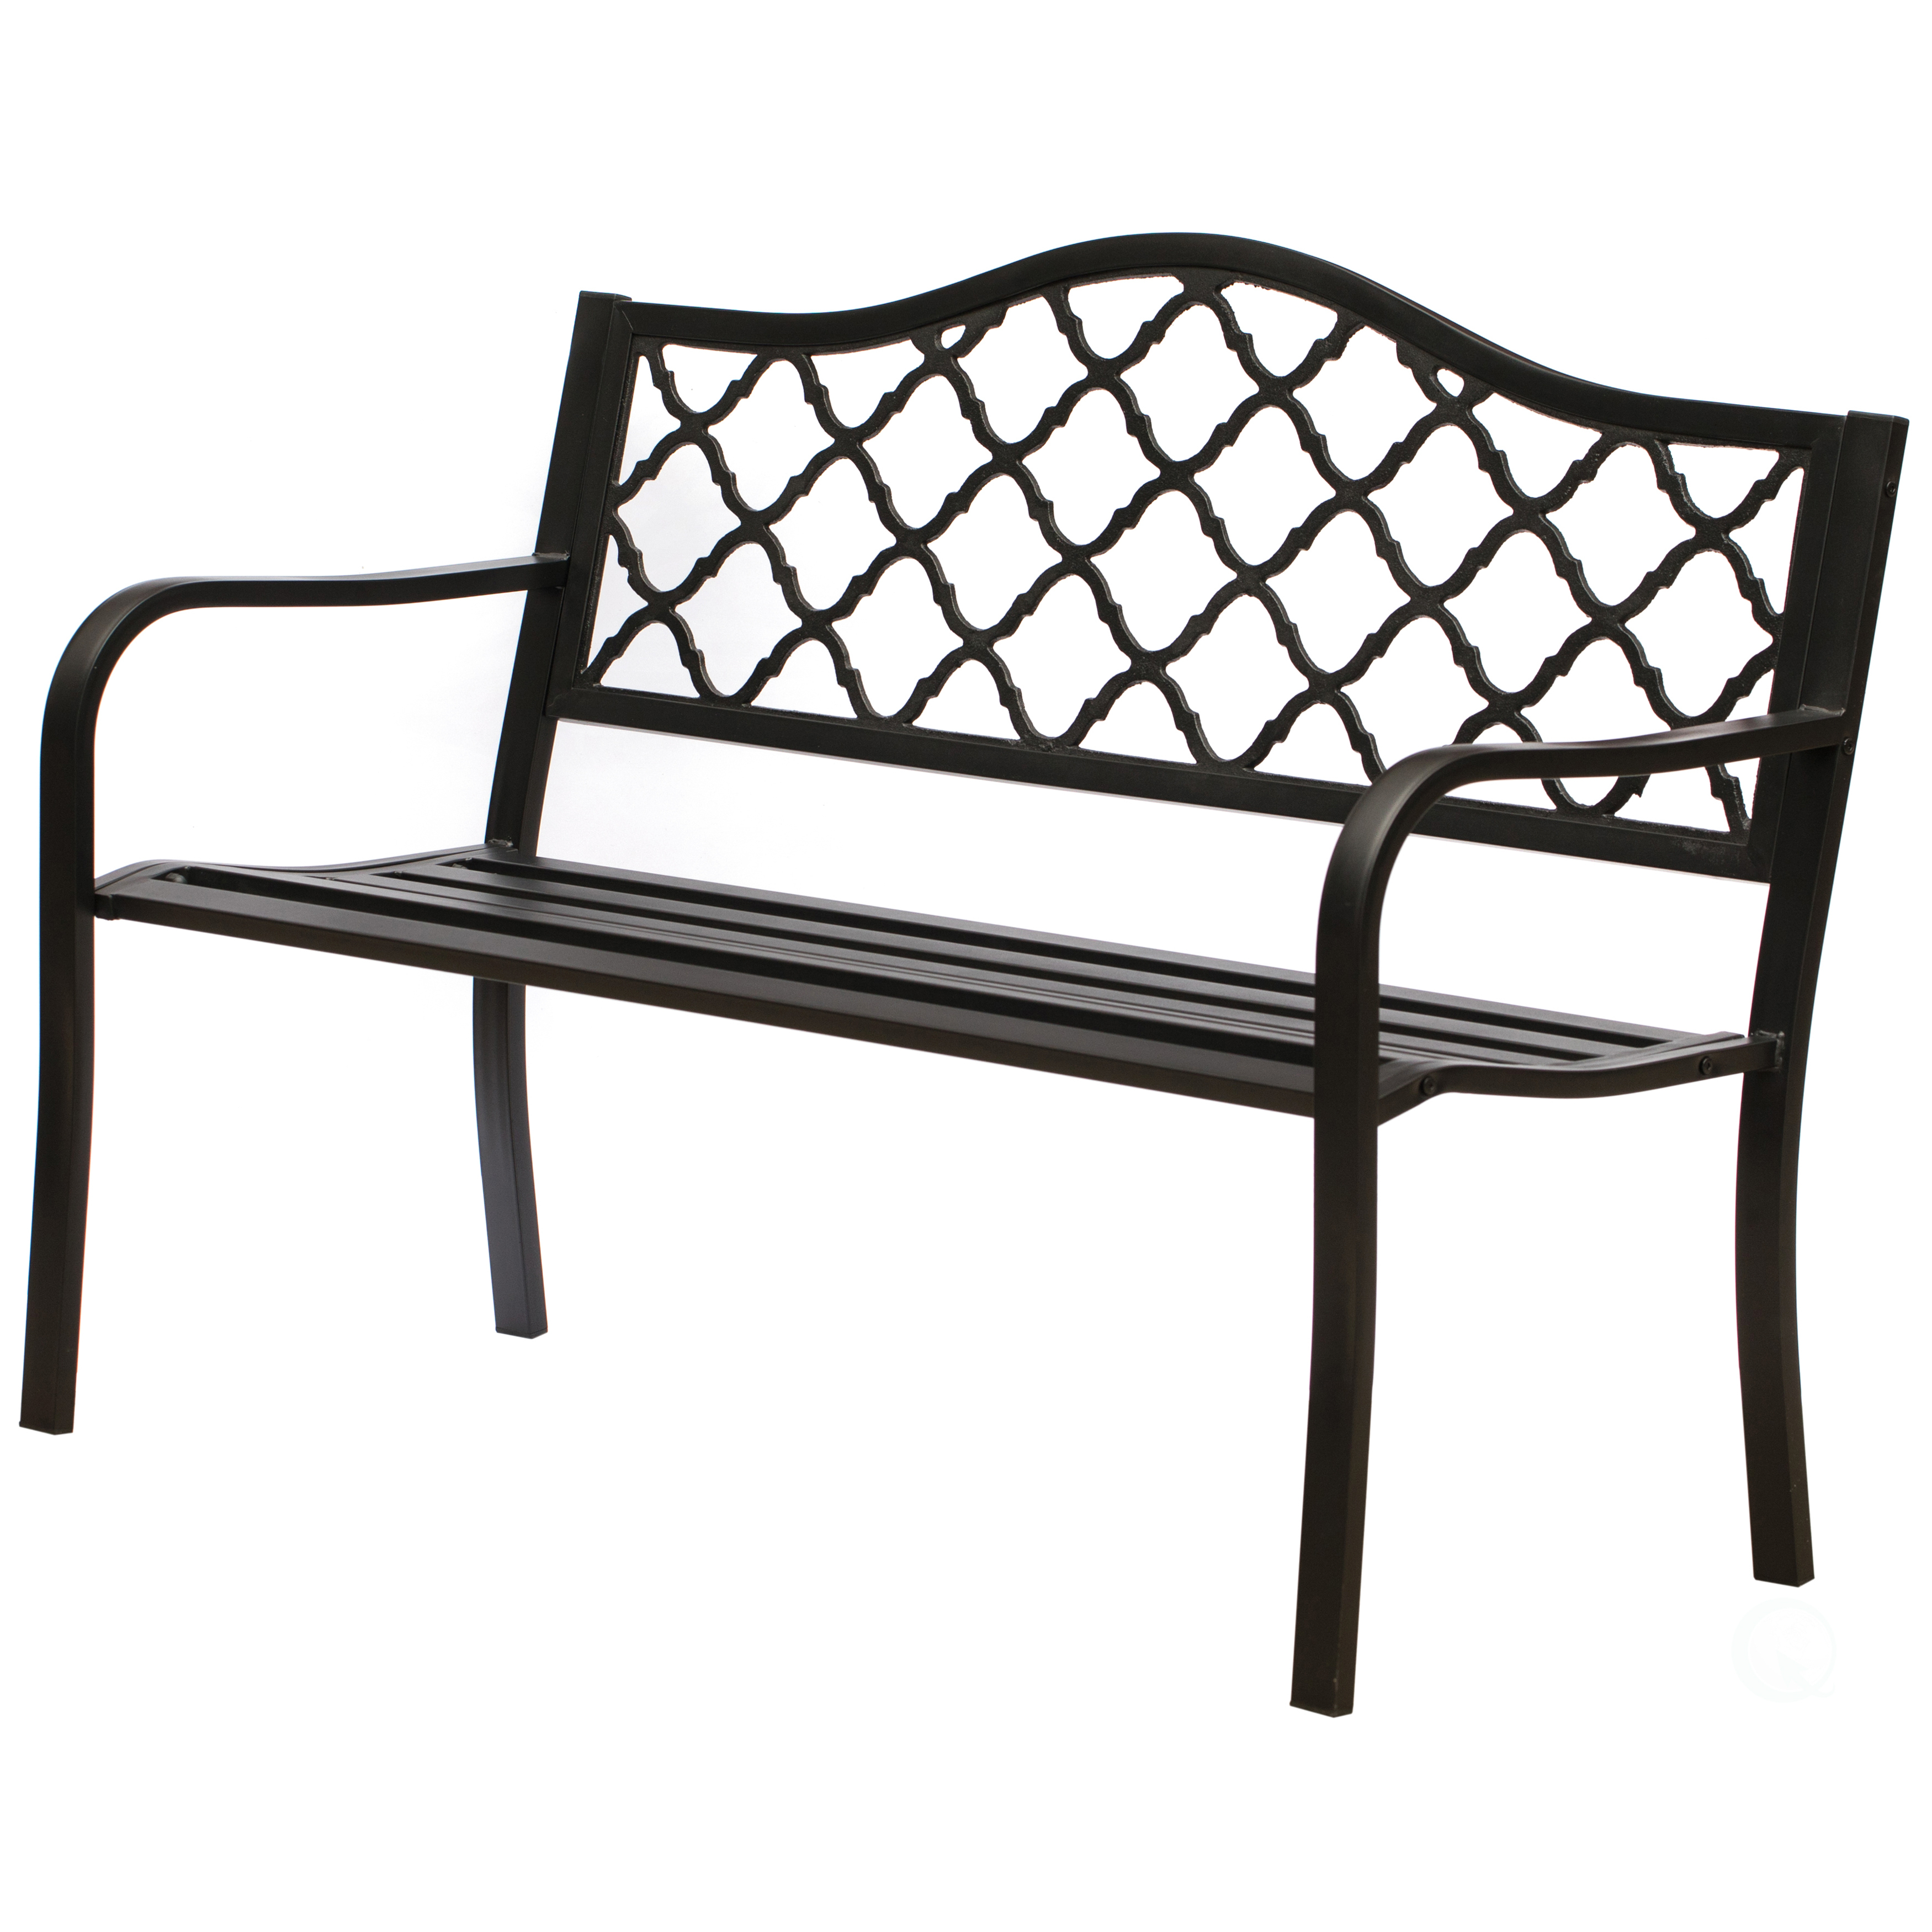 Garden Outdoor Black Patio Steel Park Bench Lawn Decor with Cast Iron Back